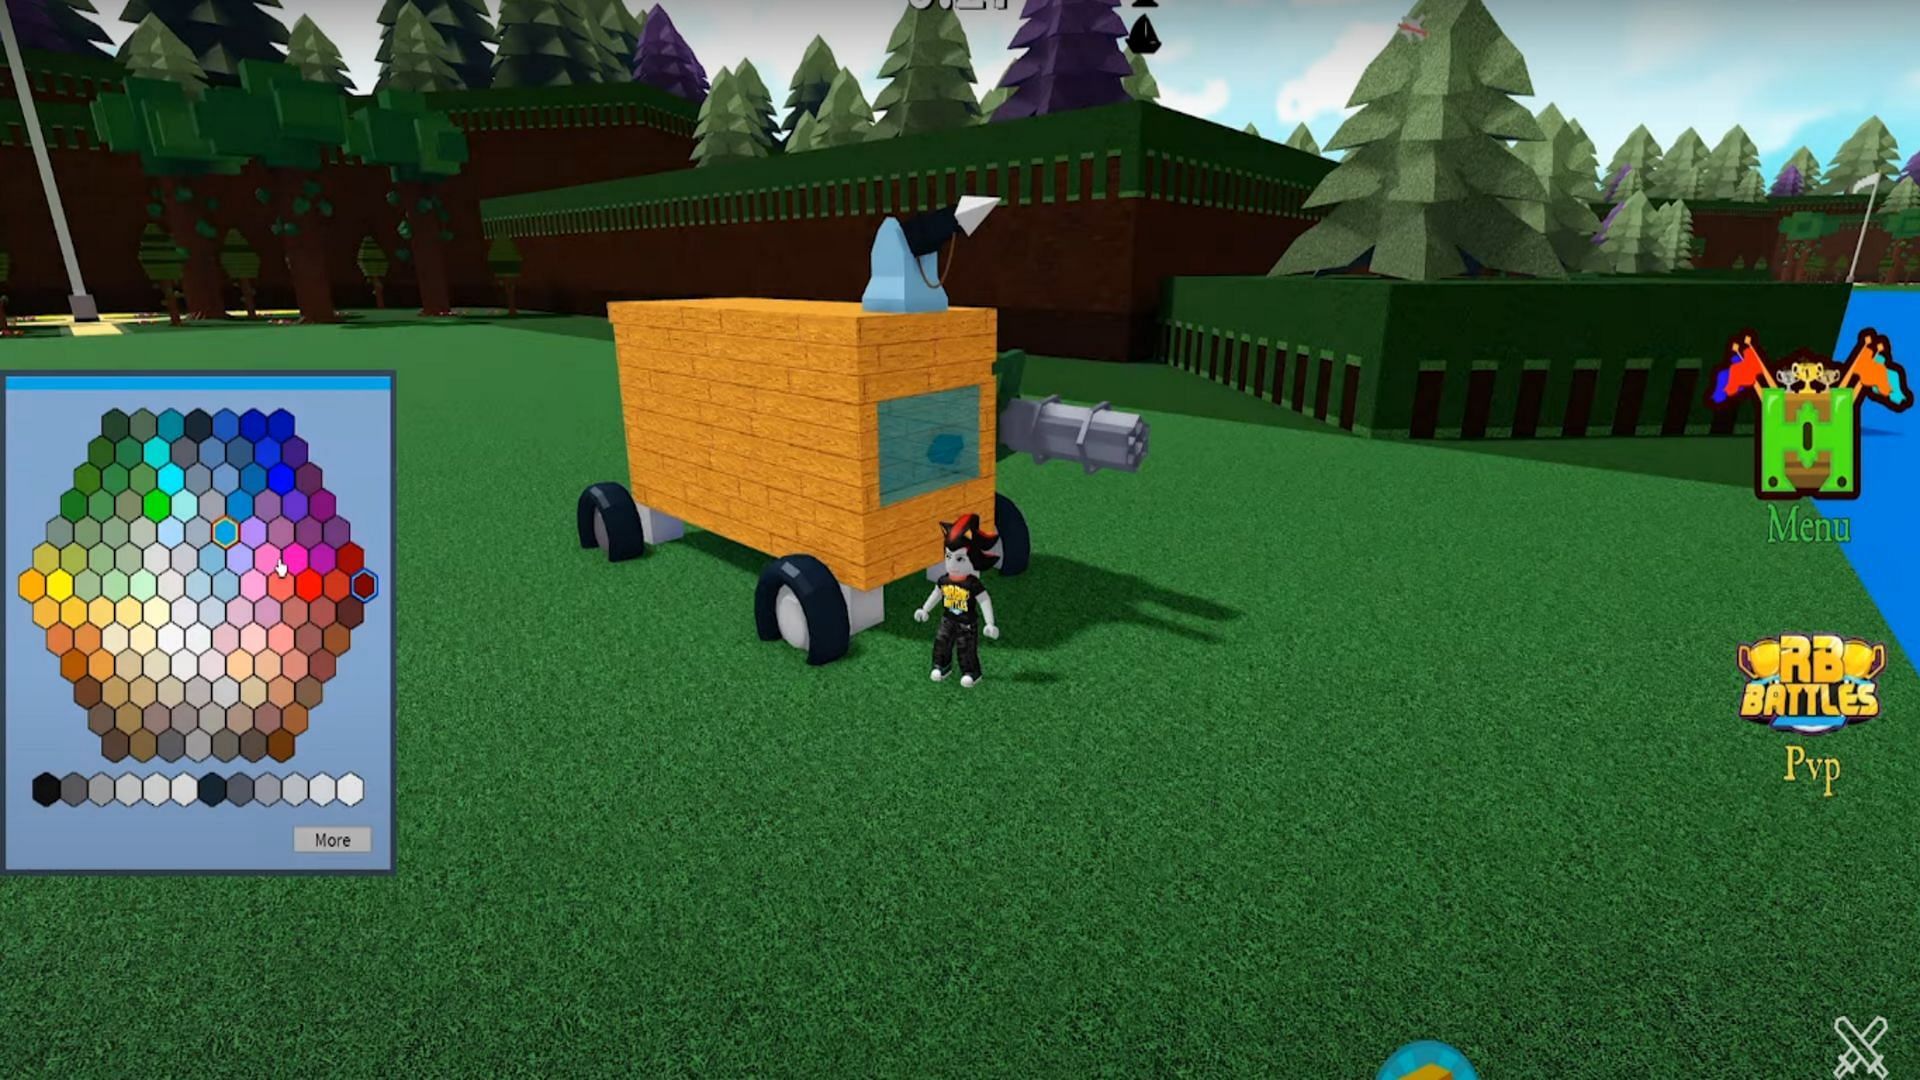 Jayingee painting his boat (Image via Roblox Battles/YouTube)